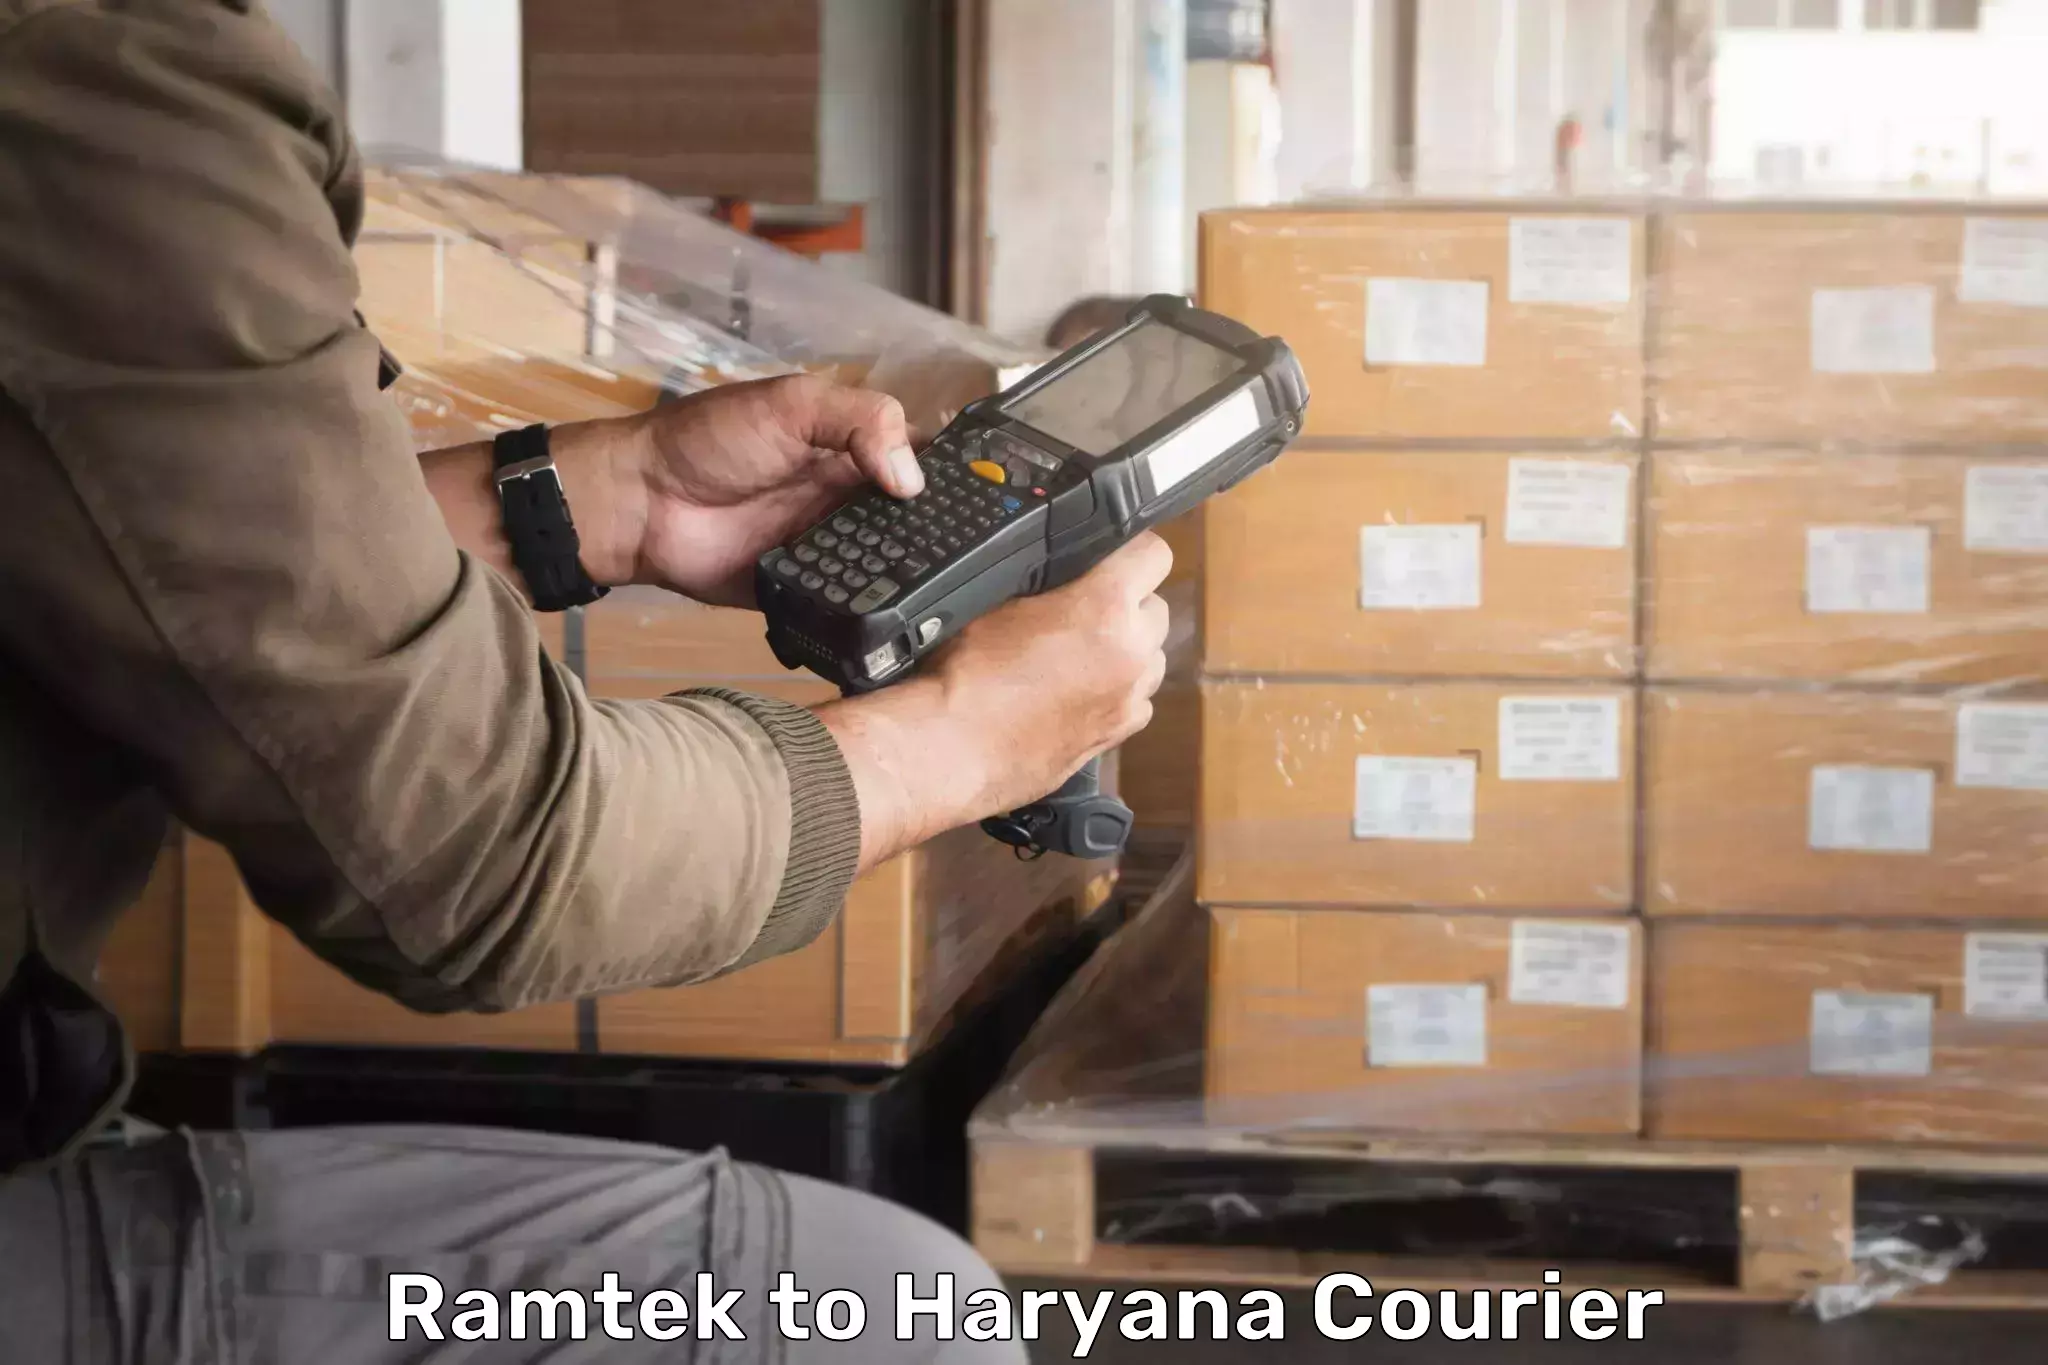 Easy access courier services Ramtek to Chaudhary Charan Singh Haryana Agricultural University Hisar